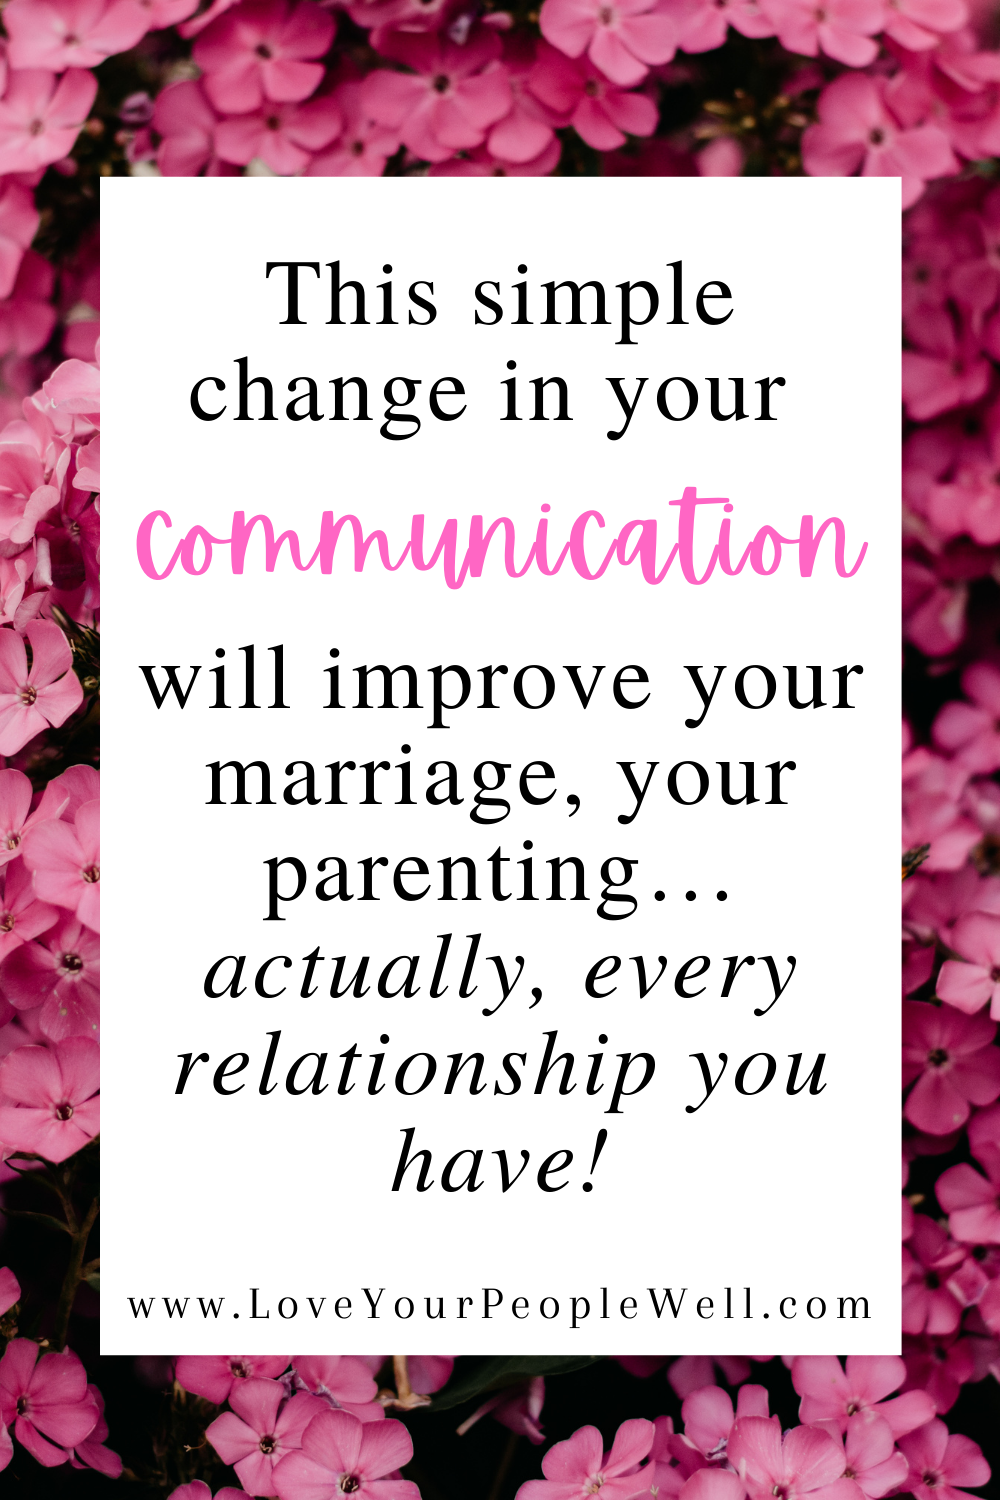 This simple change in your communication will improve your marriage, your parenting… actually, every relationship you have! // Episode 16